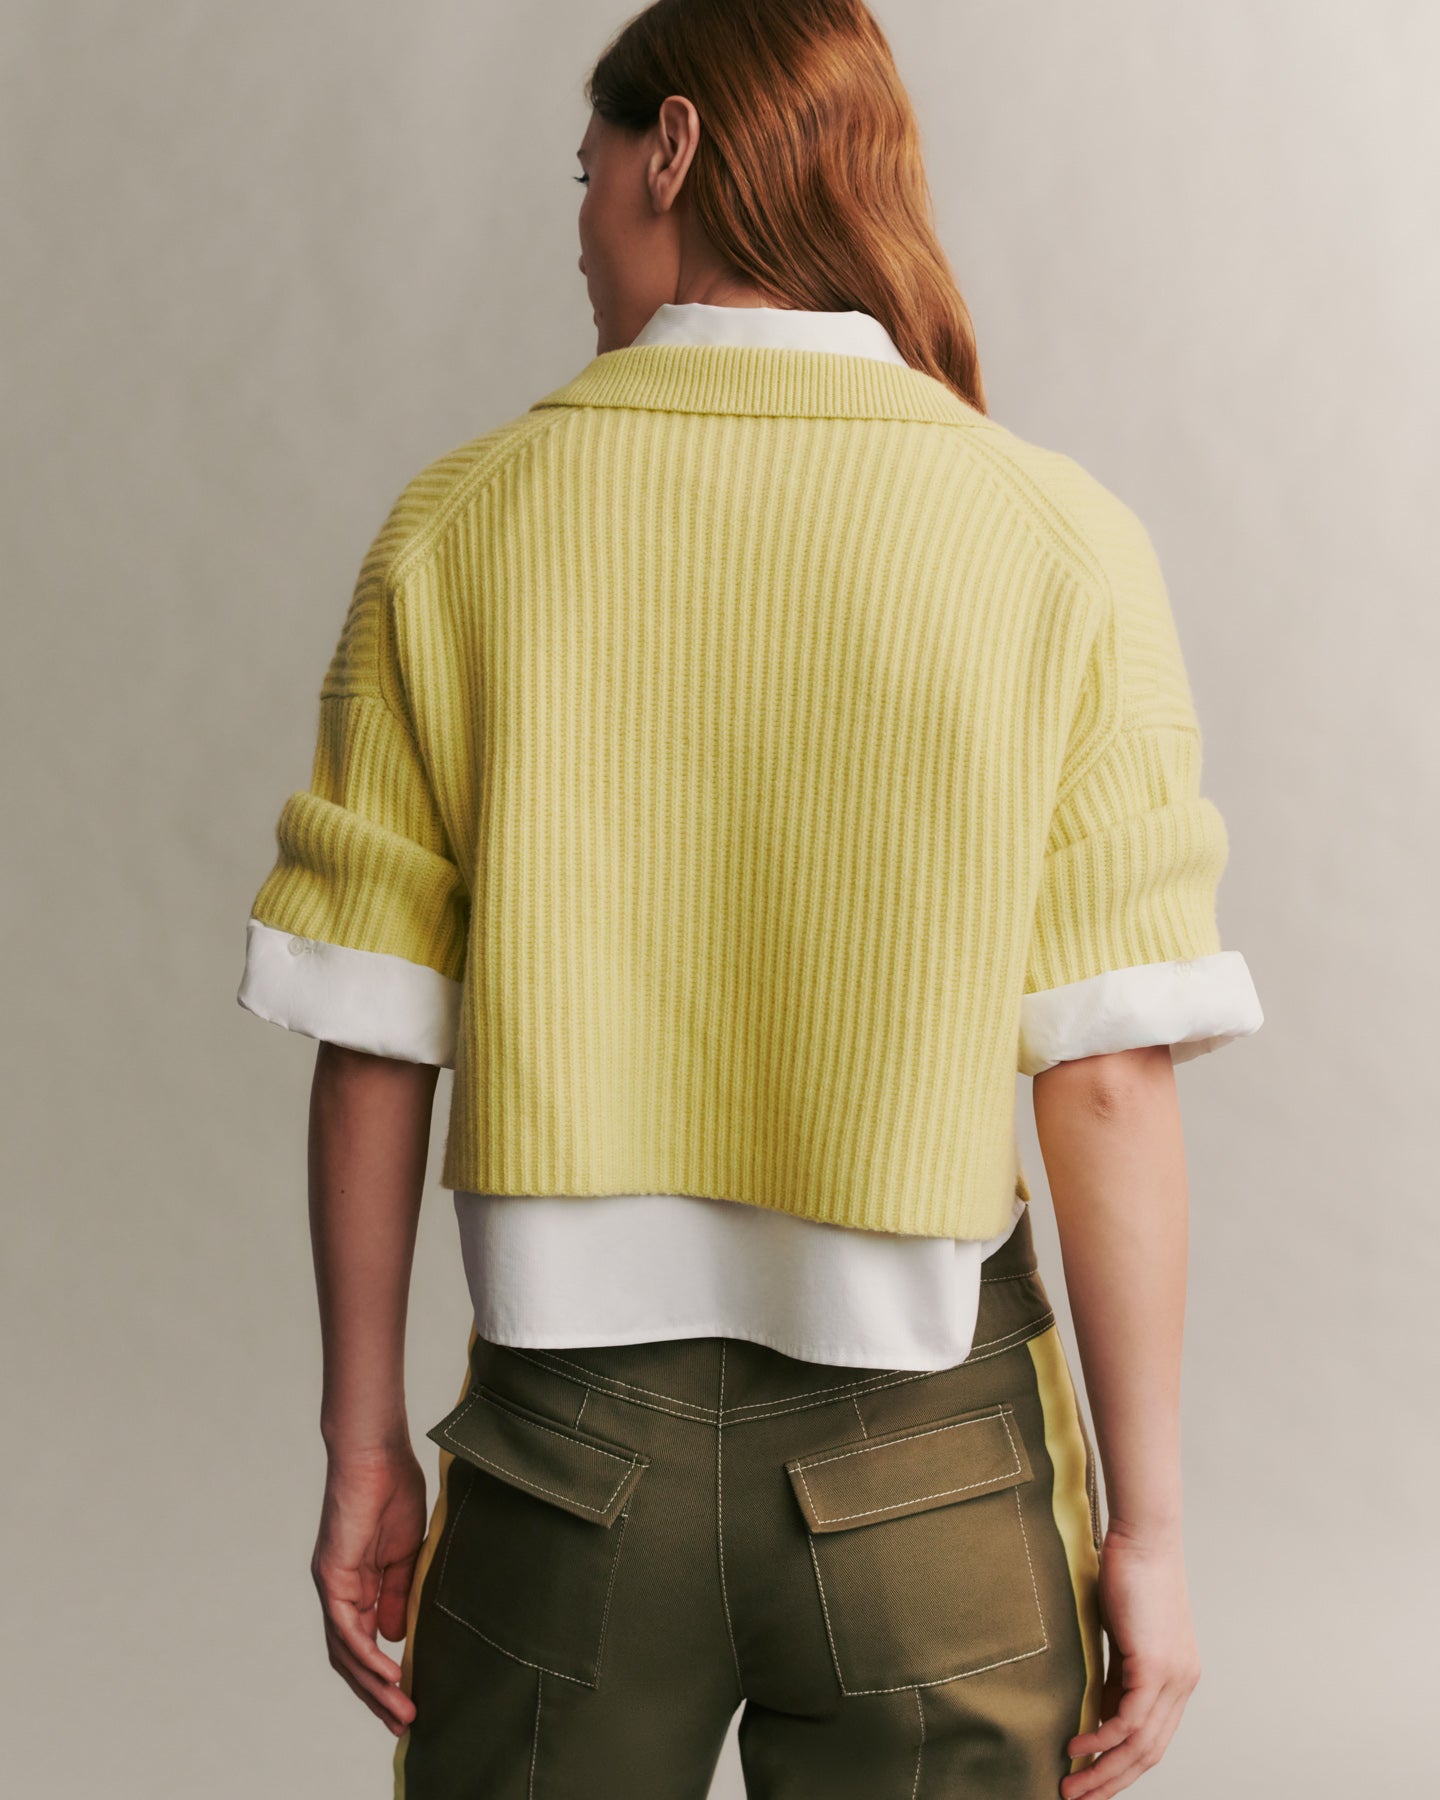 TWP Charlock Tallulah Sweater in Cashmere view 4